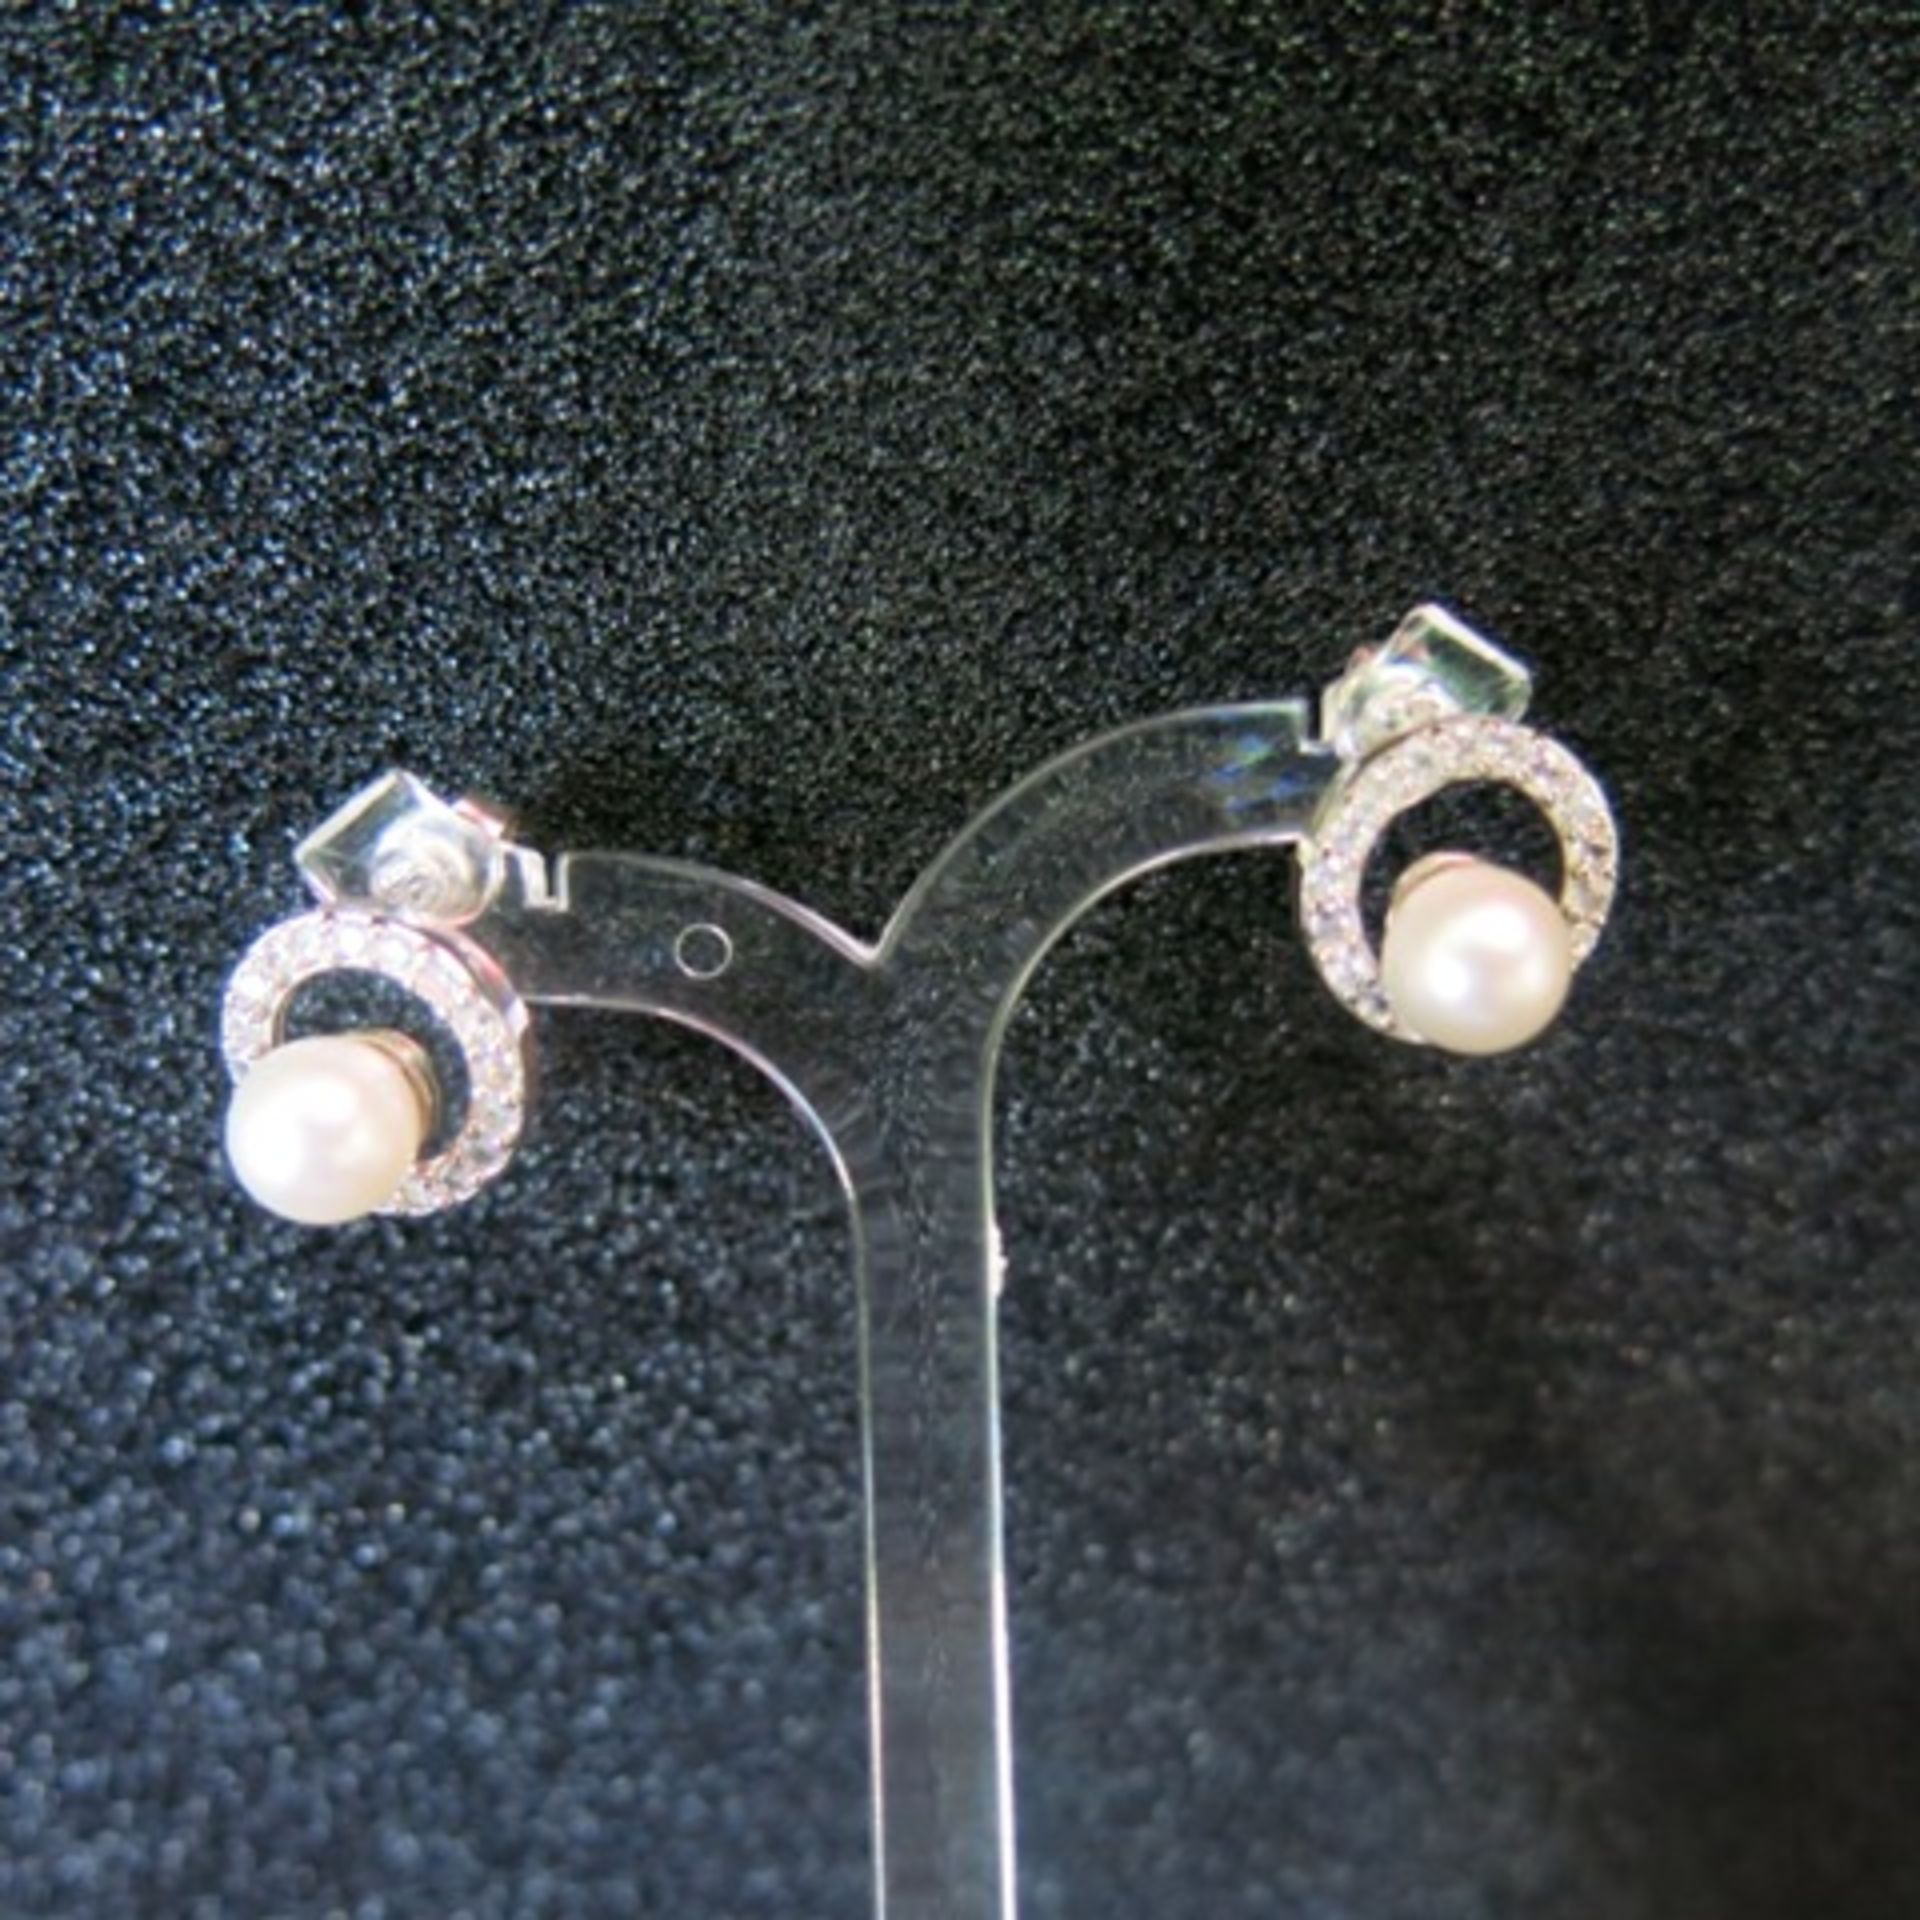 Pair of Pearl Stud Earrings with White Metal & Clear Stone Surround. RRP £178.00 - Image 2 of 2